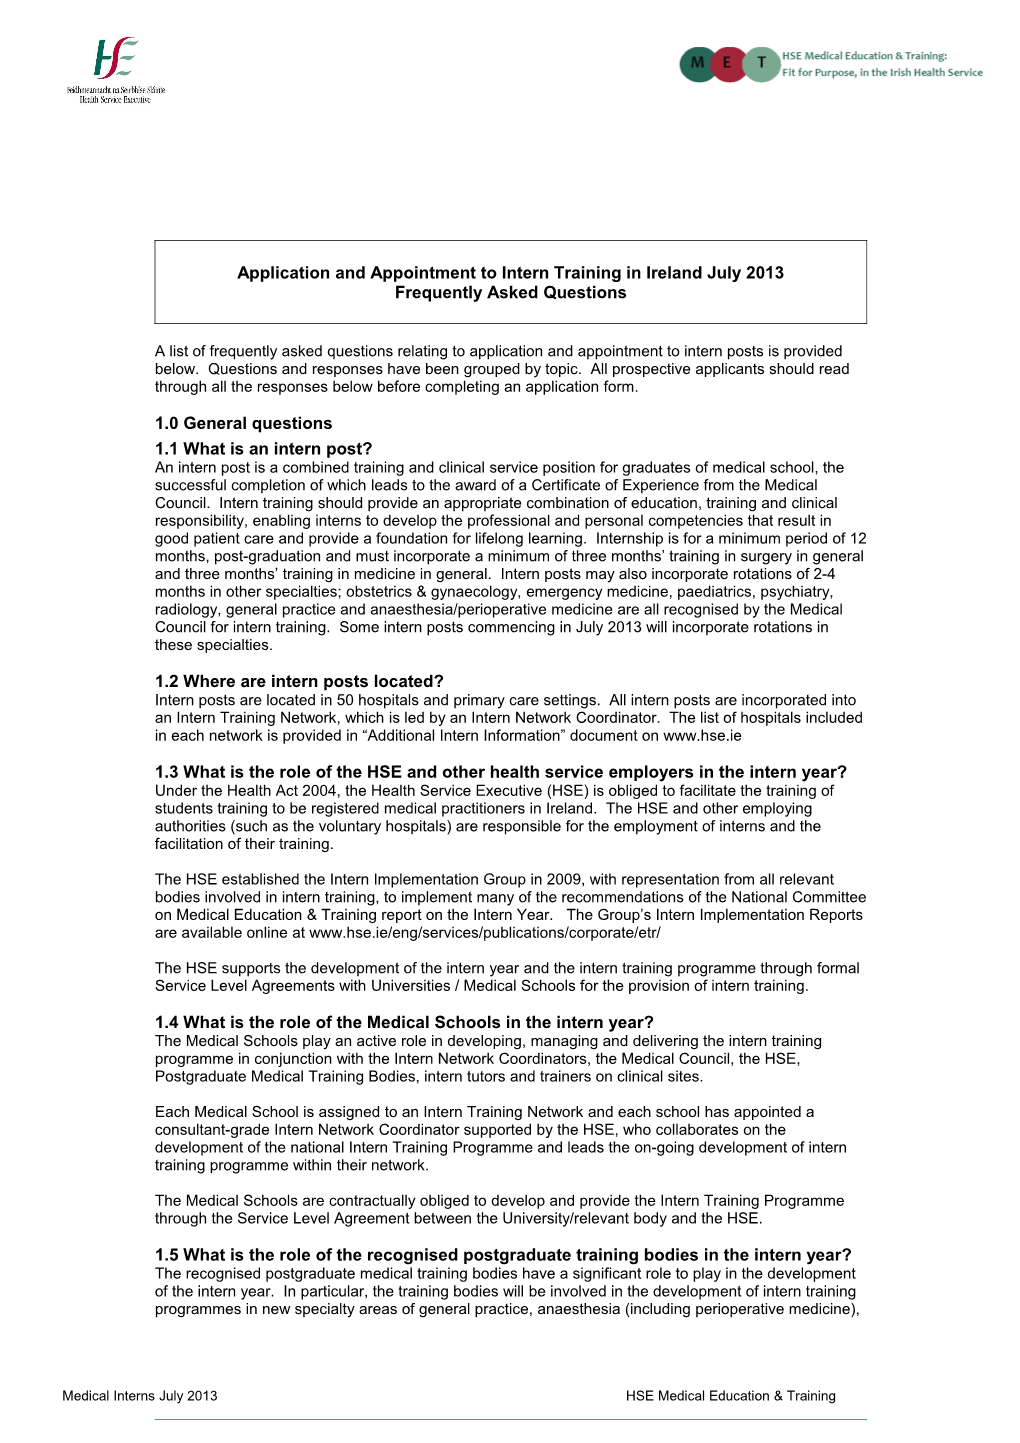 Application and Appointment to Intern Training in Ireland July 2013